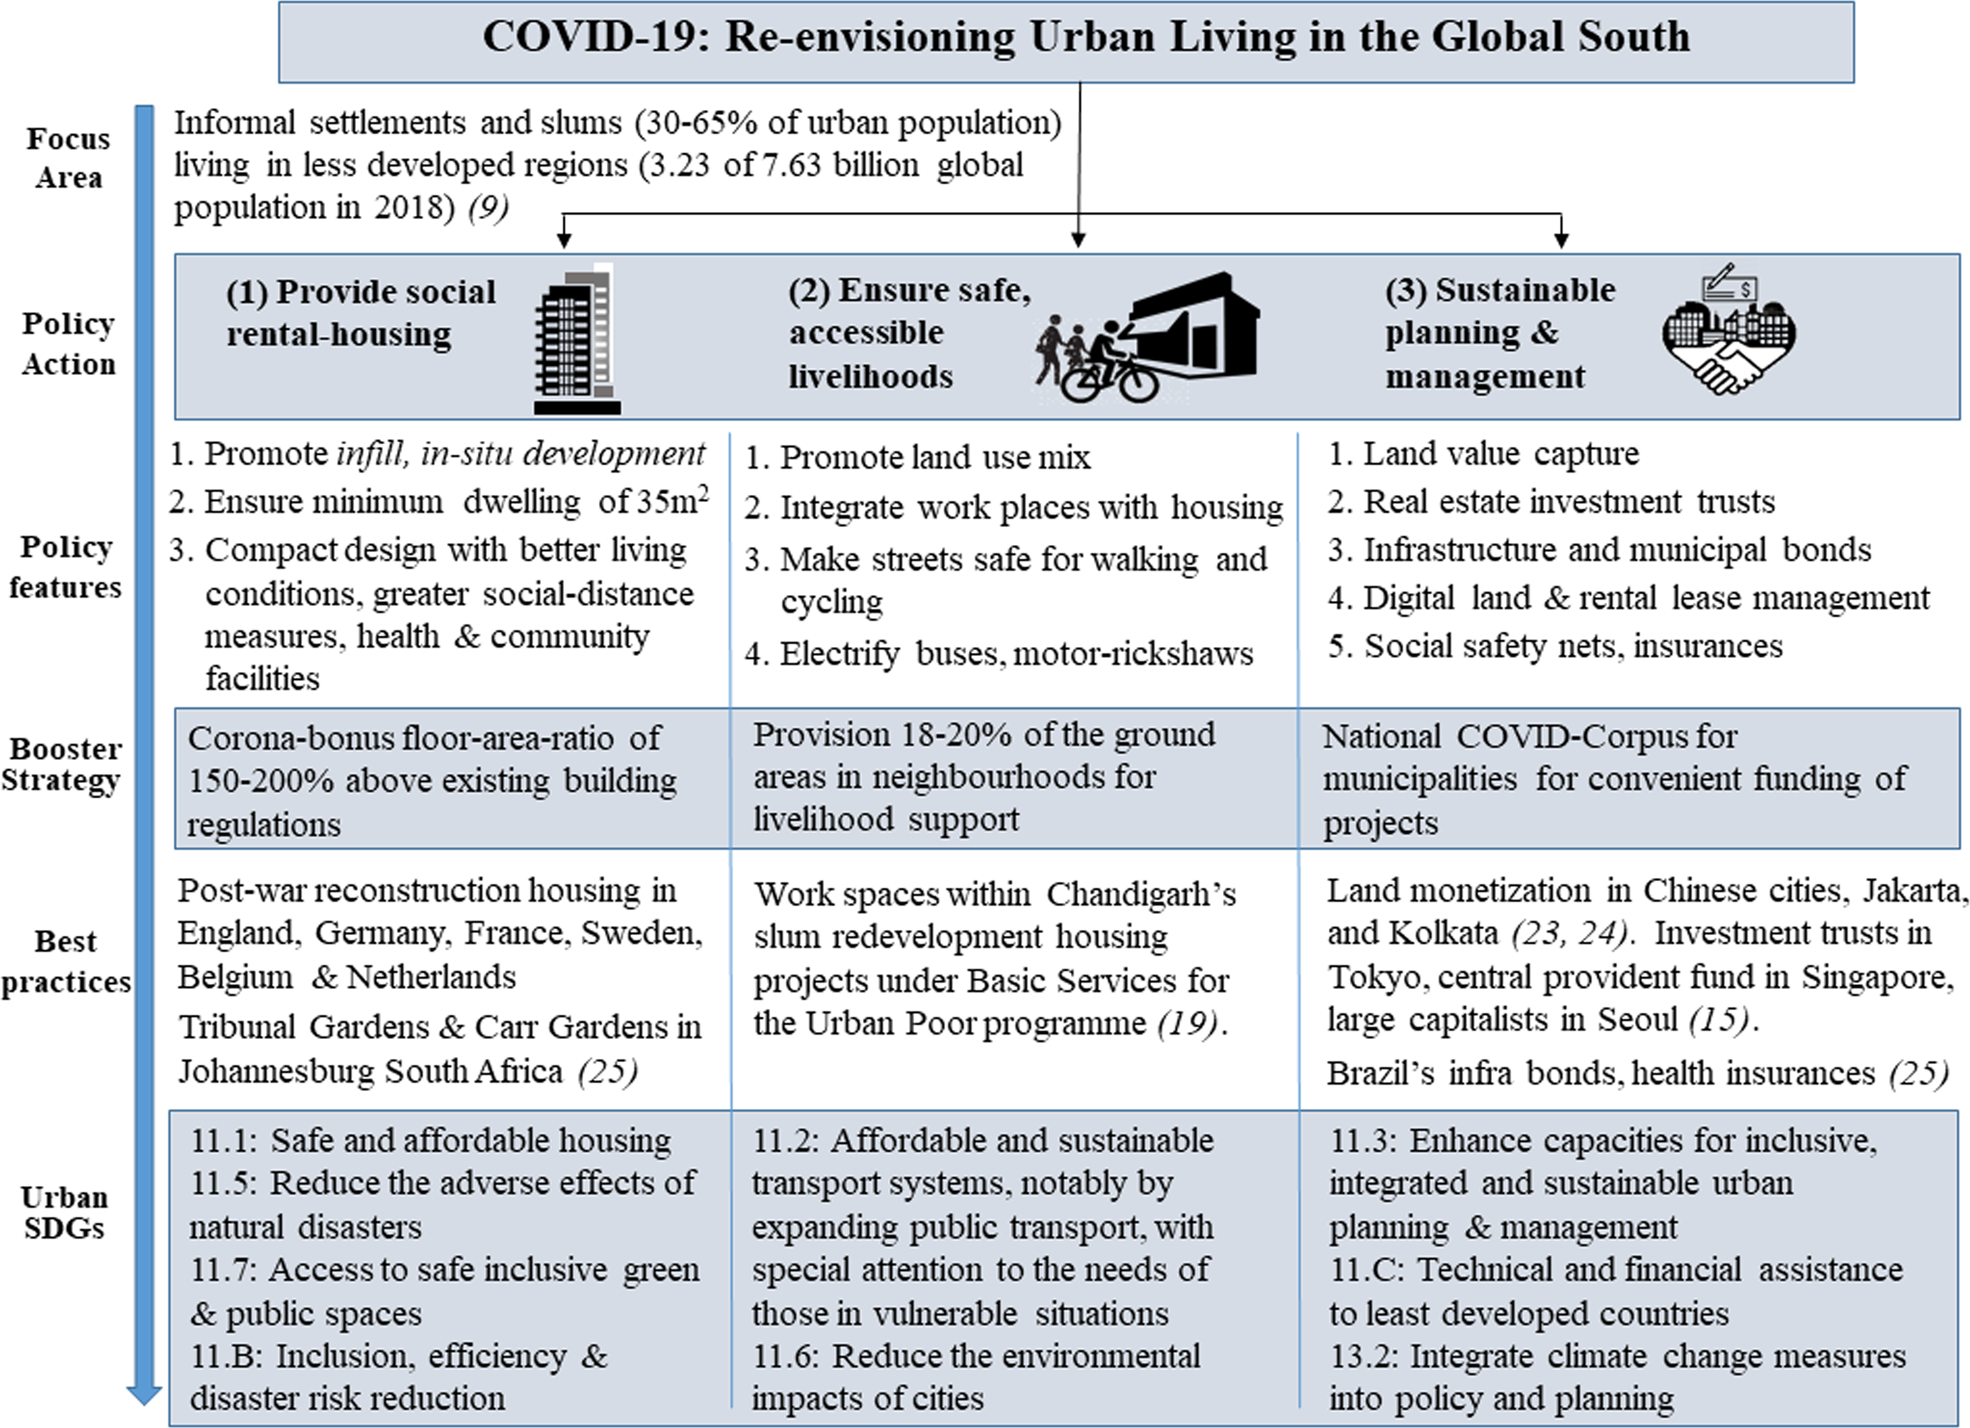 COVID-19 recovery and the global urban poor | npj Urban Sustainability